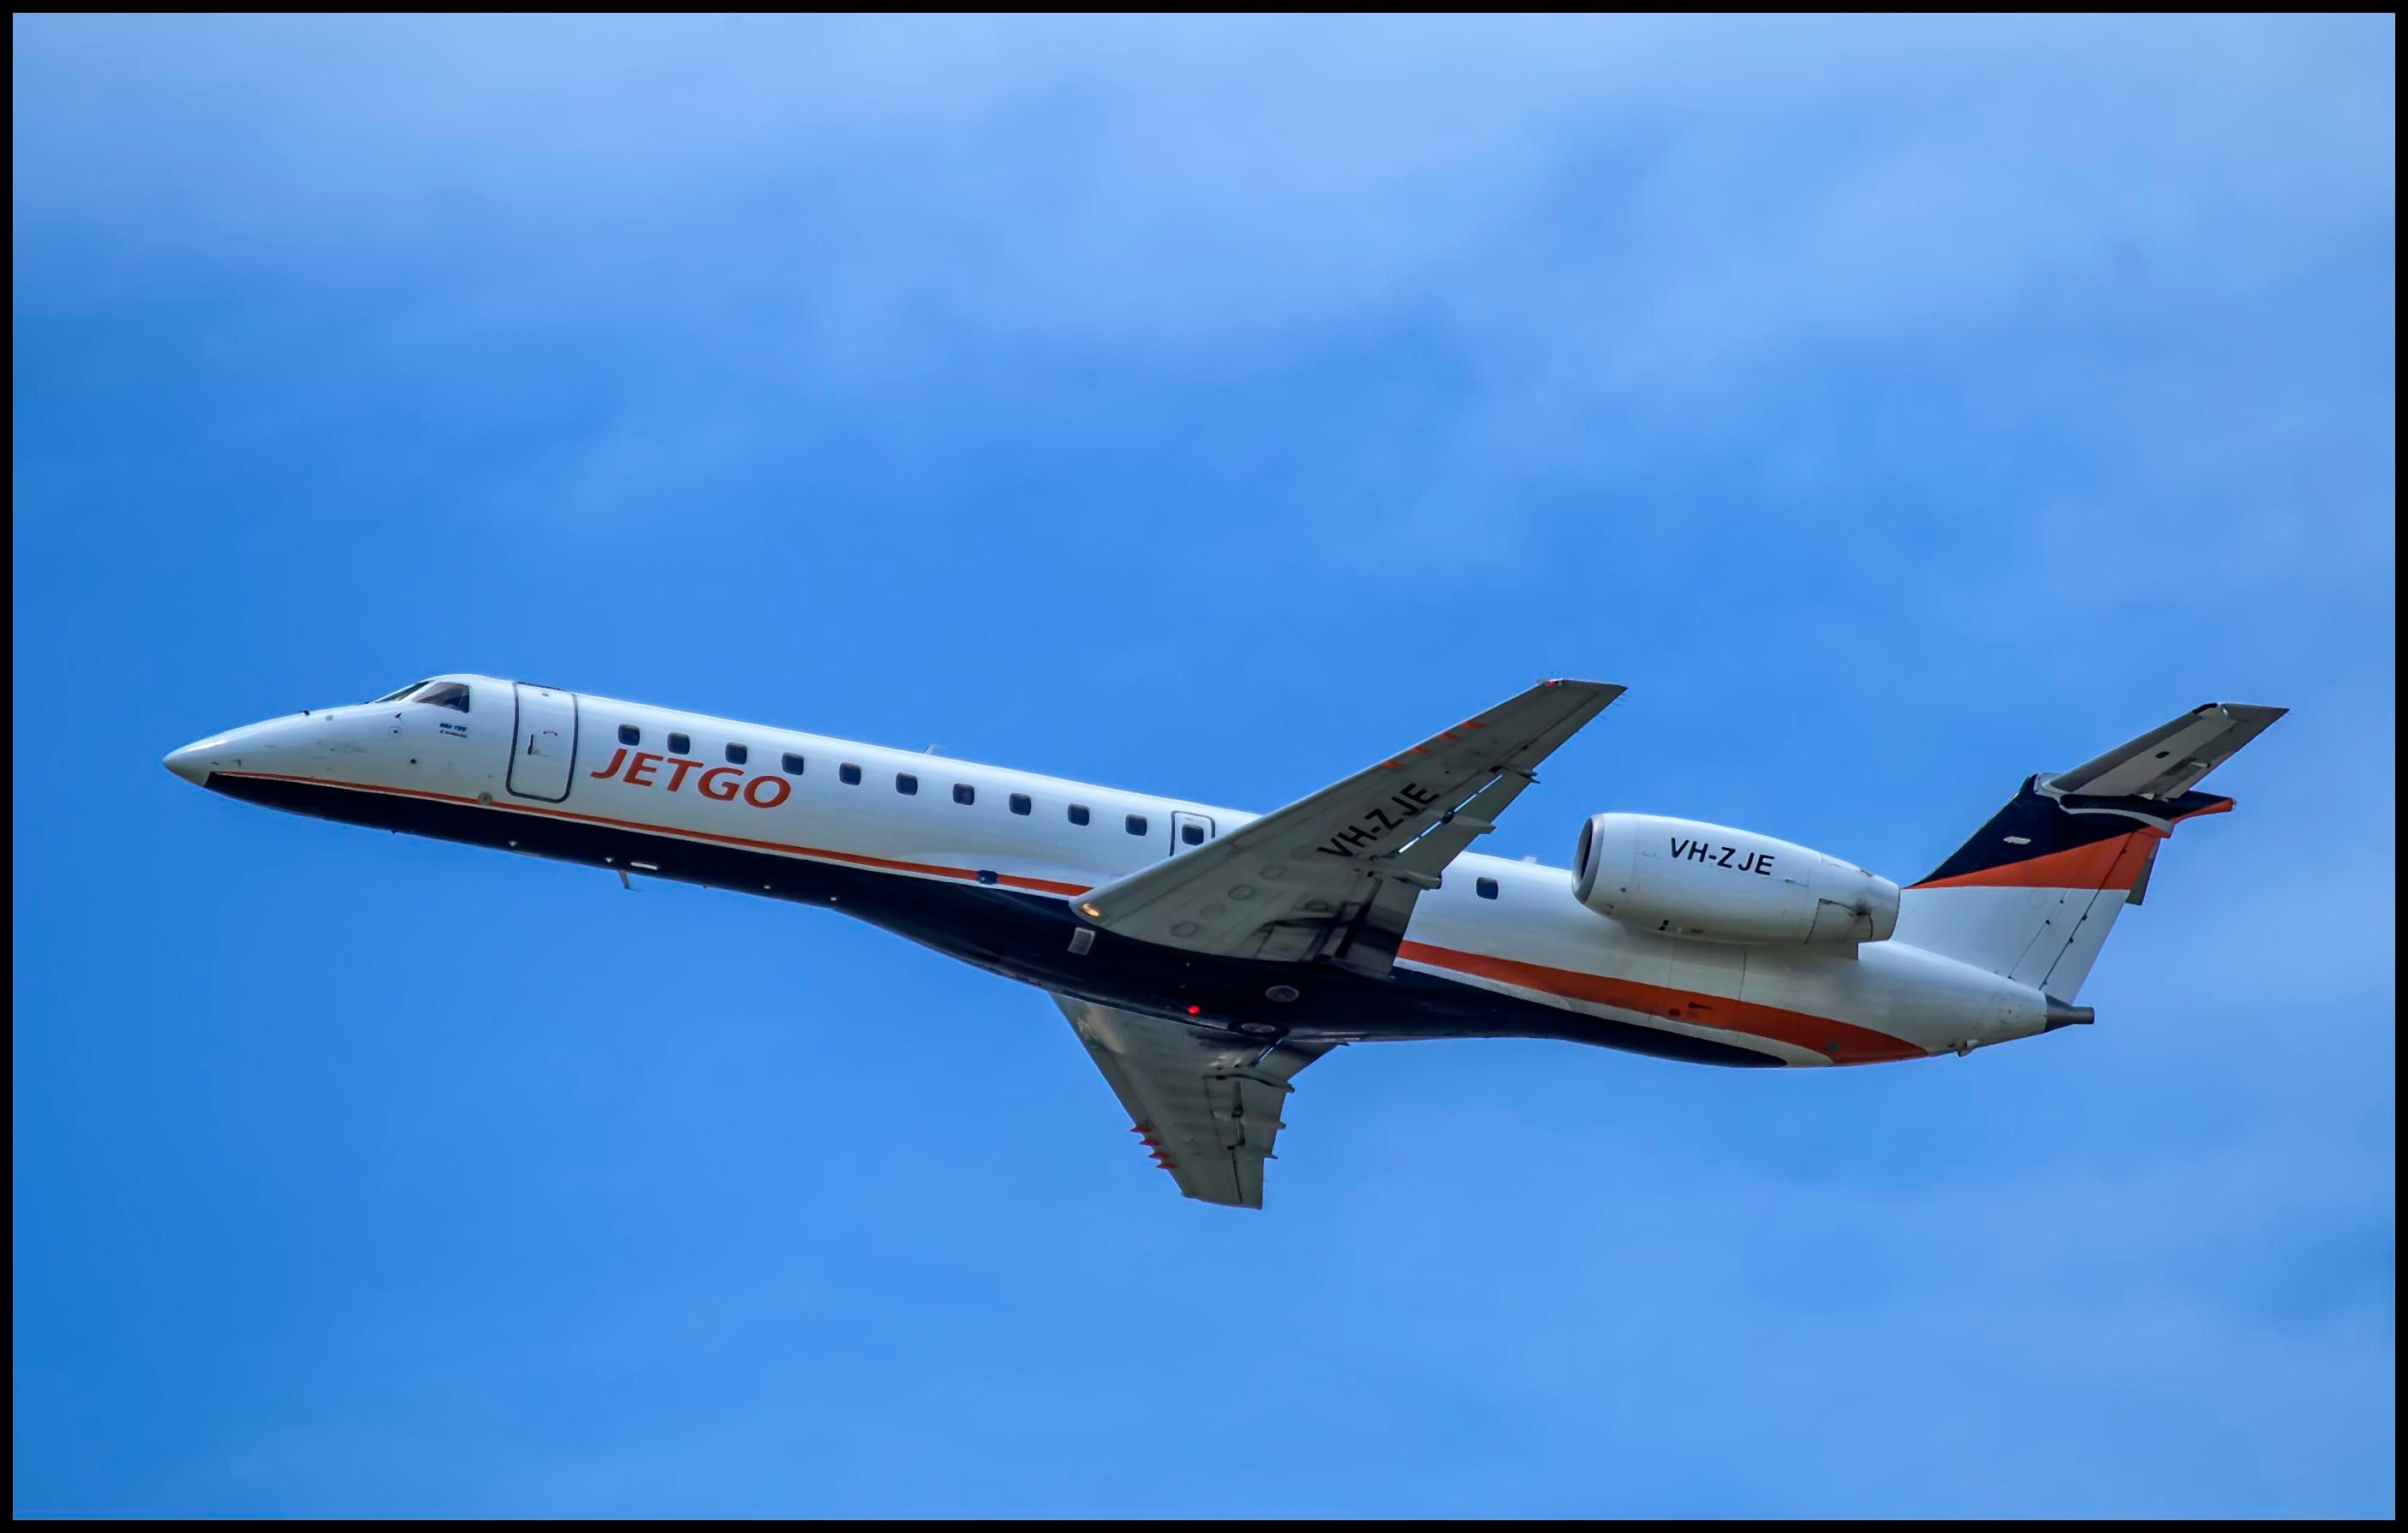 A JetGo Embraer jet flying in the sky.